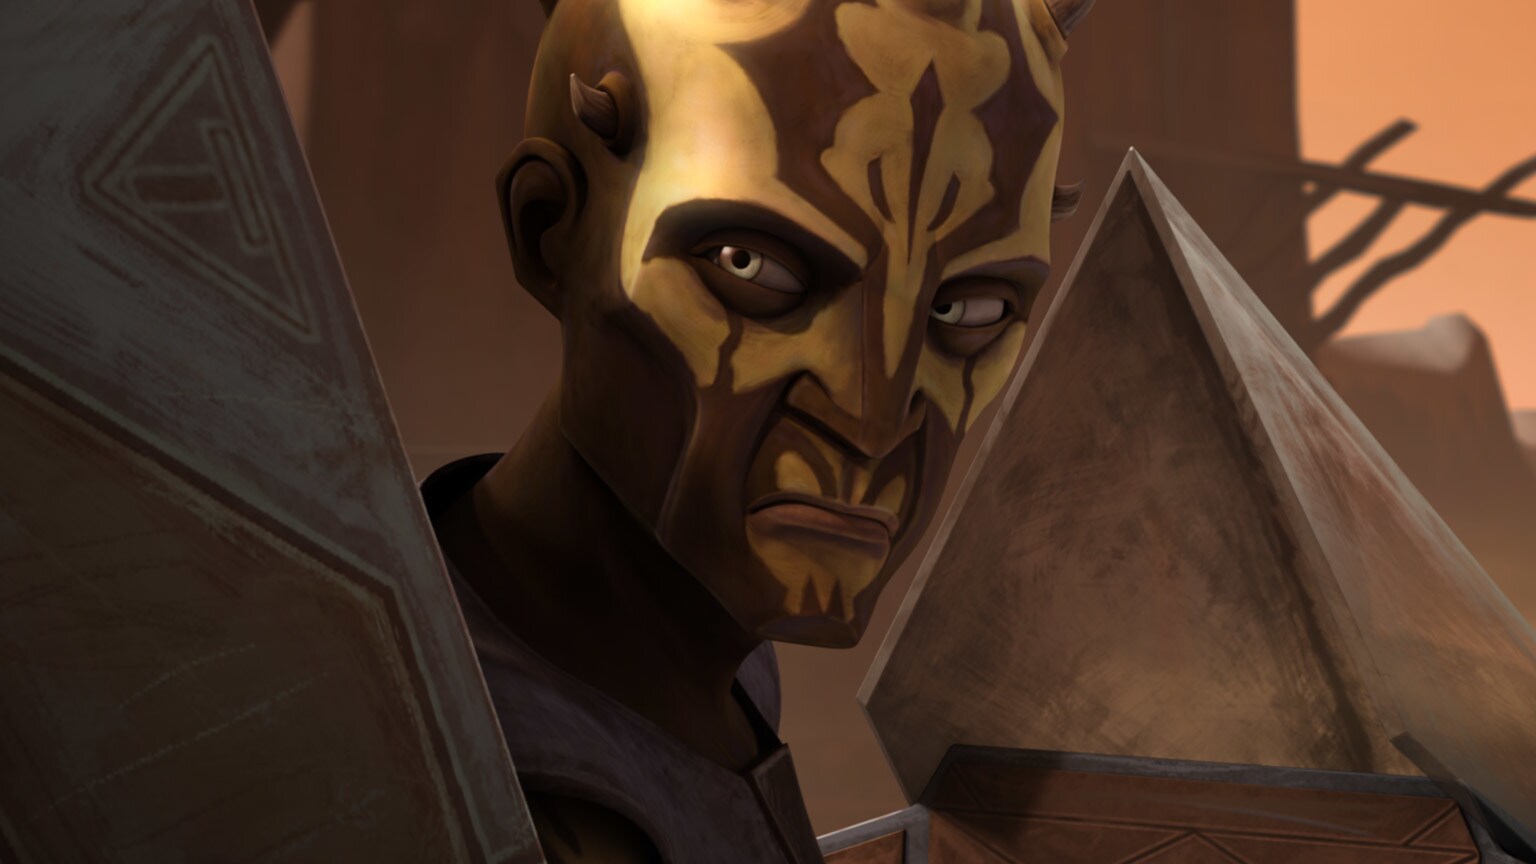 The Clone Wars Rewatch: Creating a "Monster"